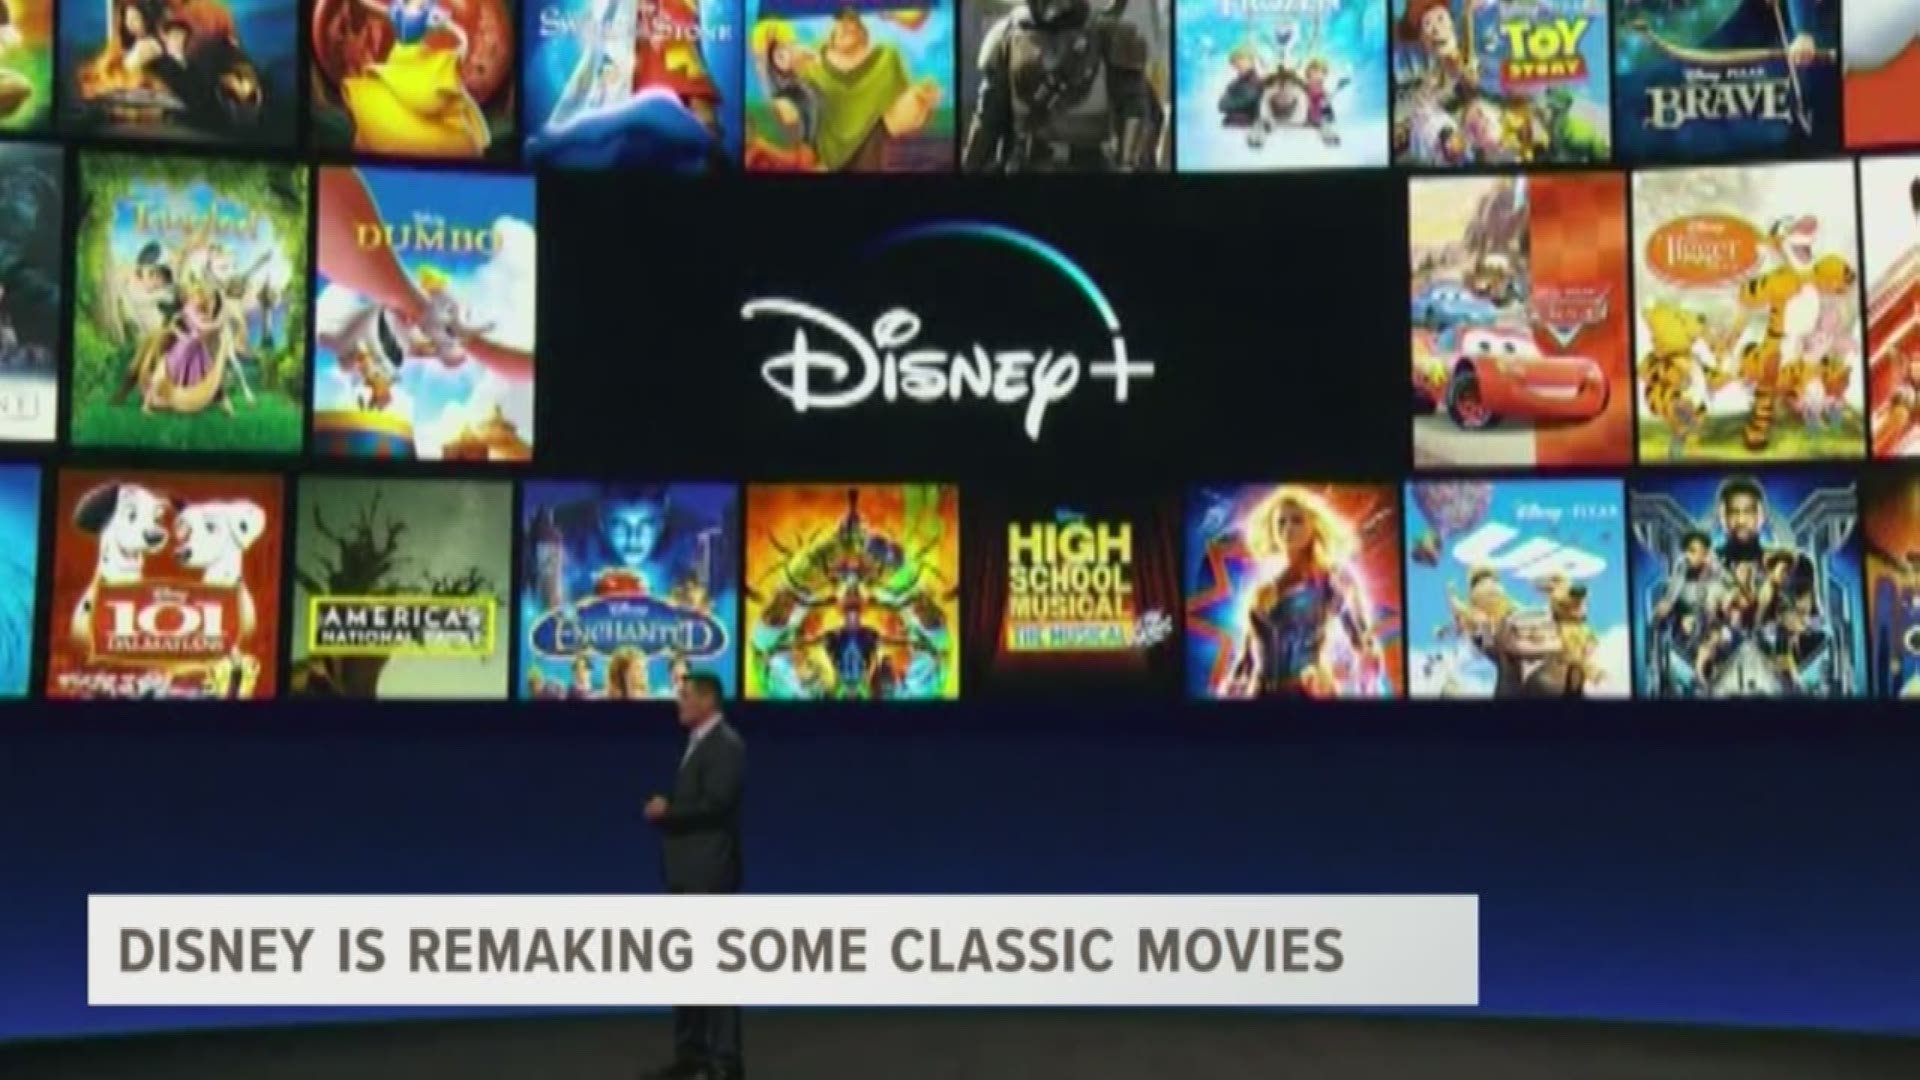 Our Malik Mingo shared what people said about Disney's announcement that they will be remaking some classic movies for its streaming service, Disney+.